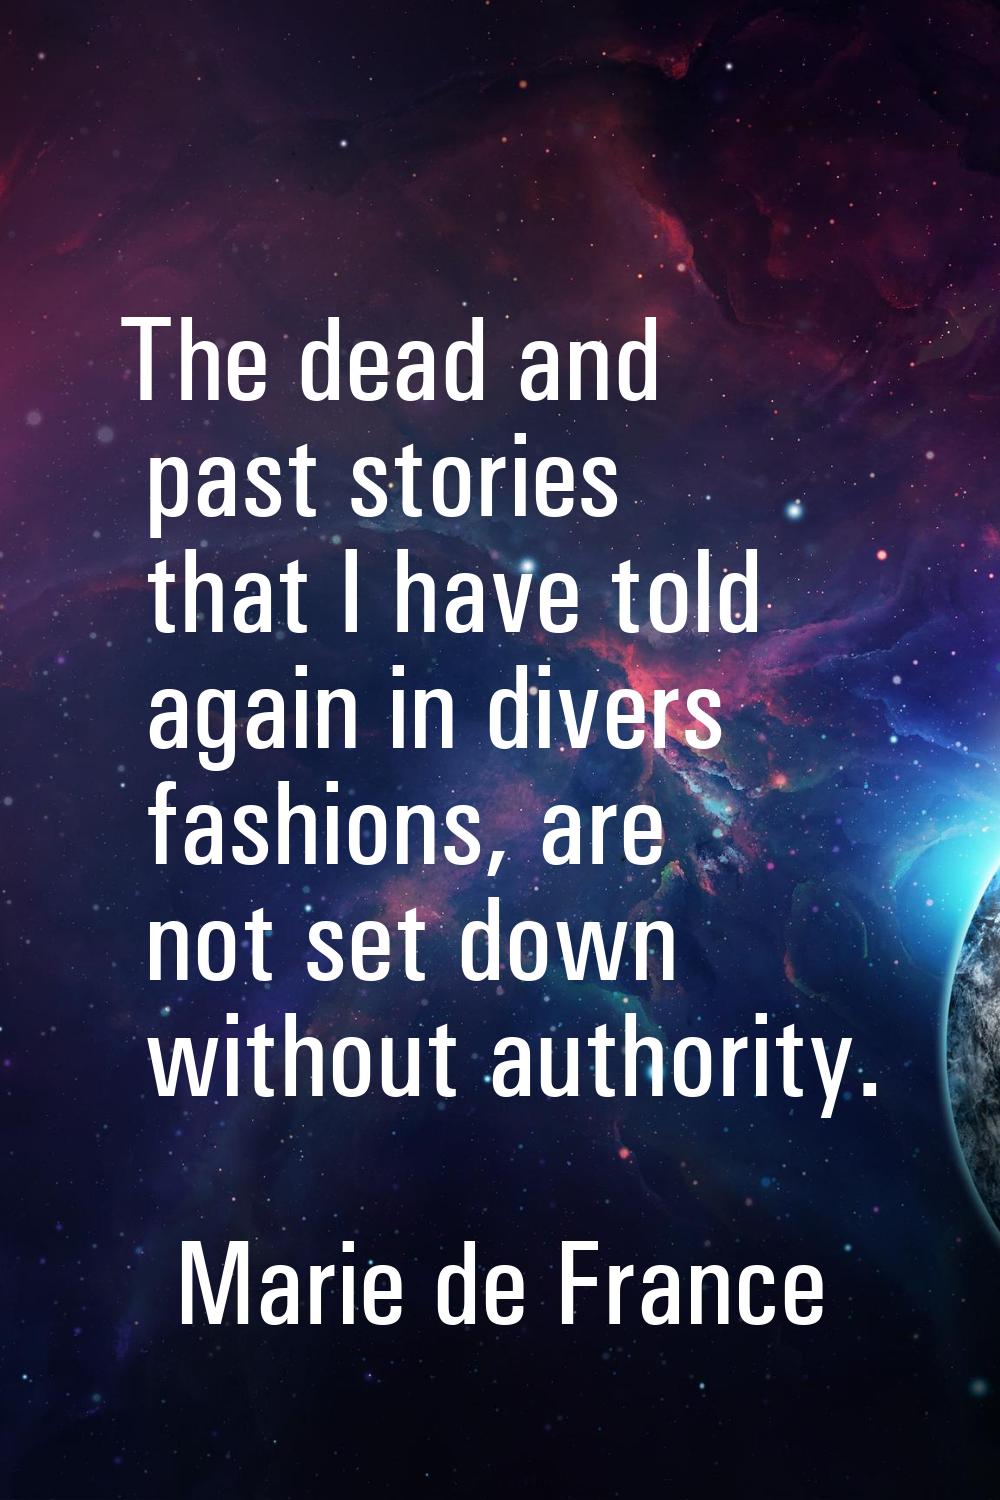 The dead and past stories that I have told again in divers fashions, are not set down without autho